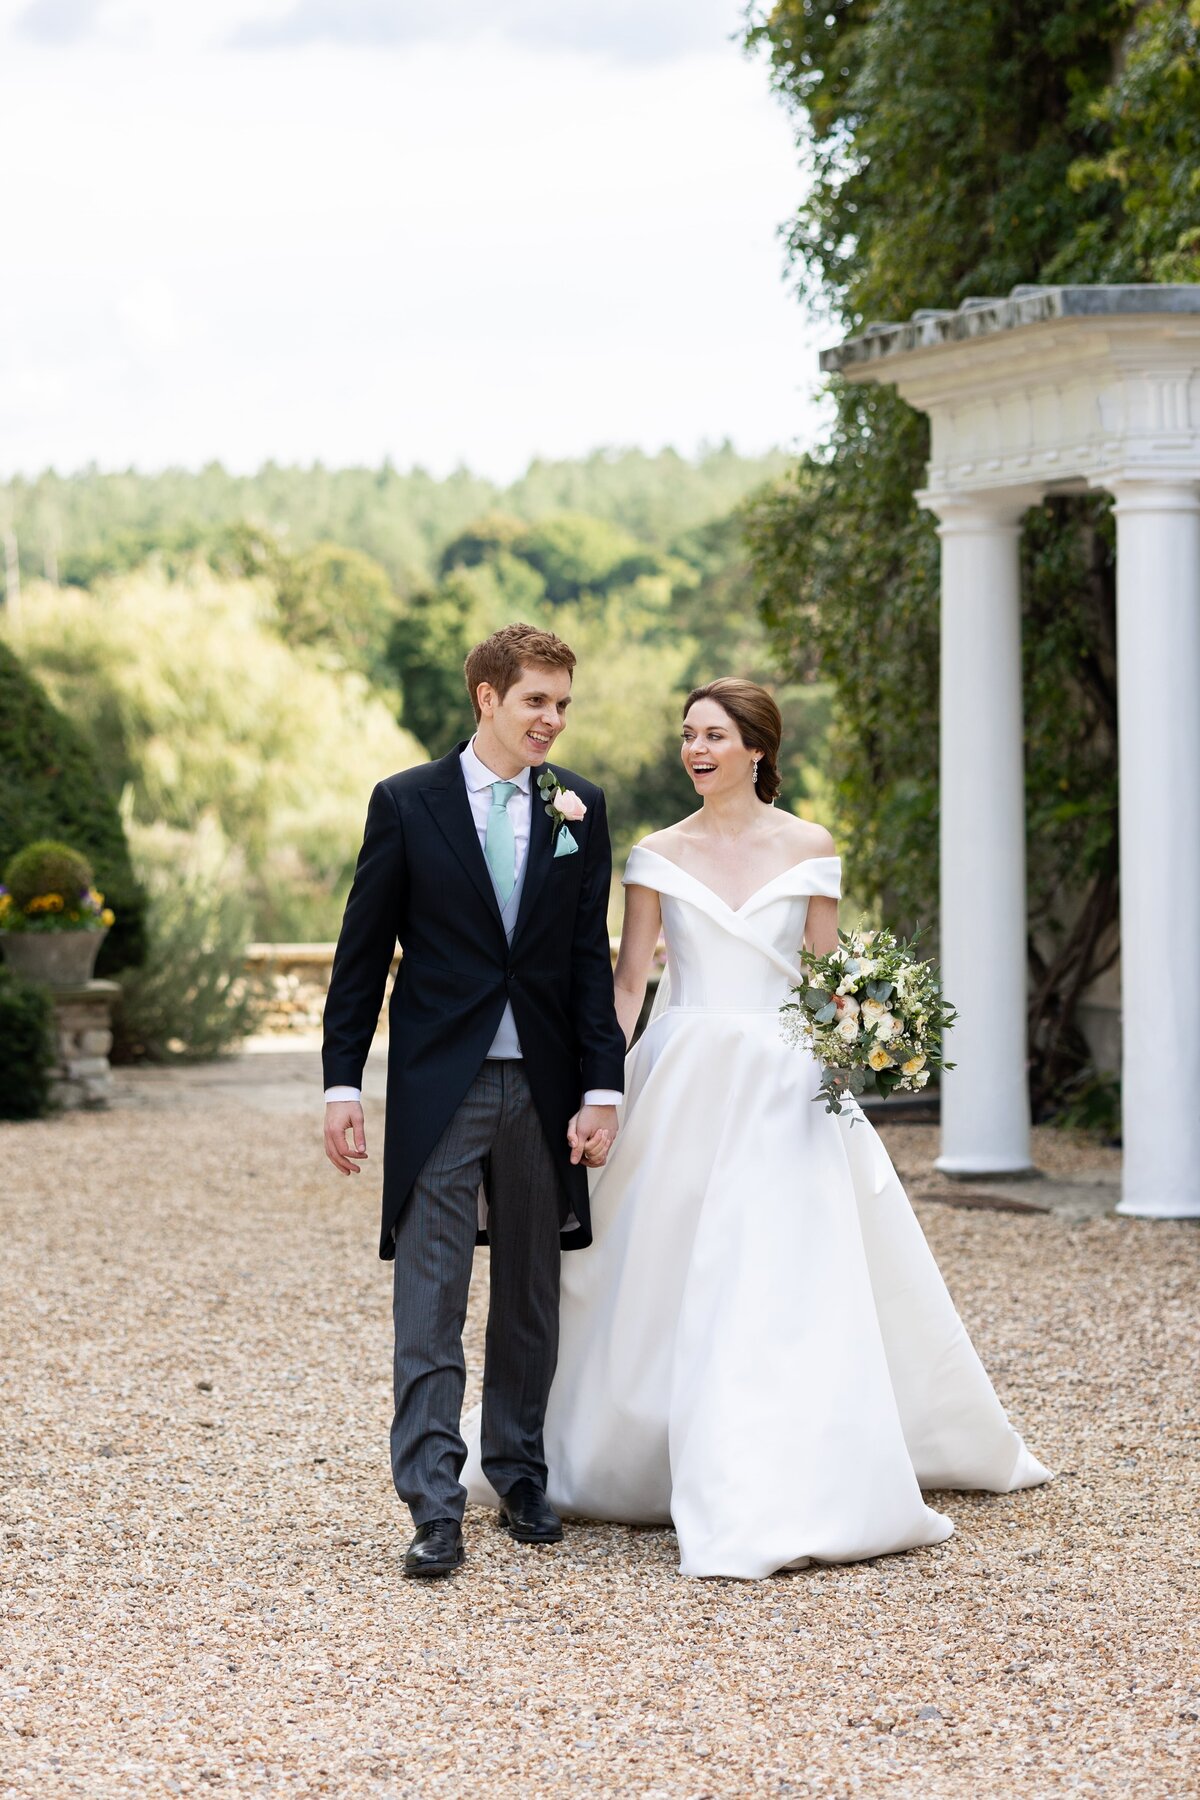 Wedding photography of bride and groom at Northbrook Park on wedding day